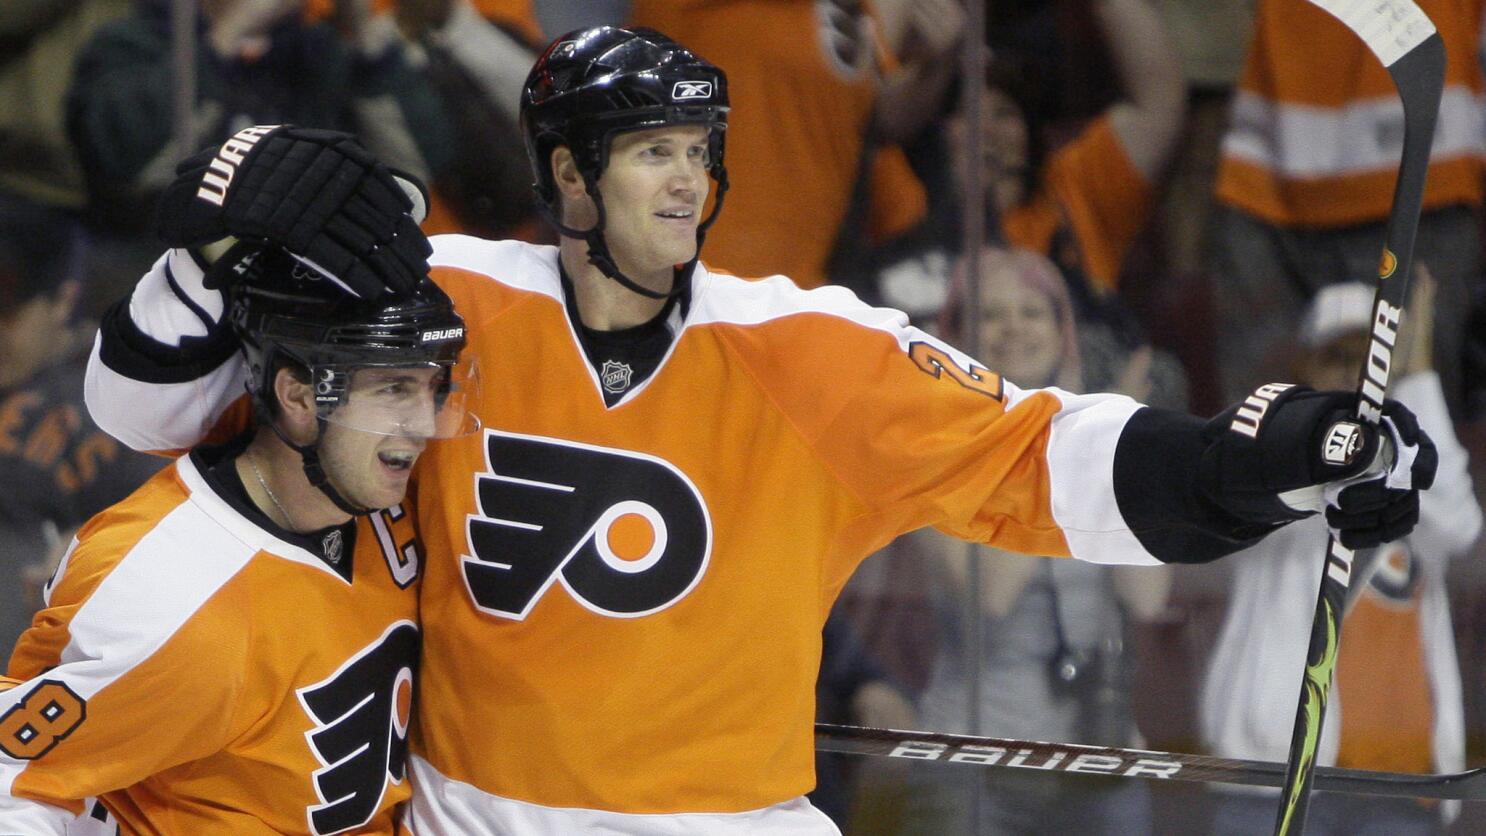 Will Chris Pronger Bring the Cup to Philly??